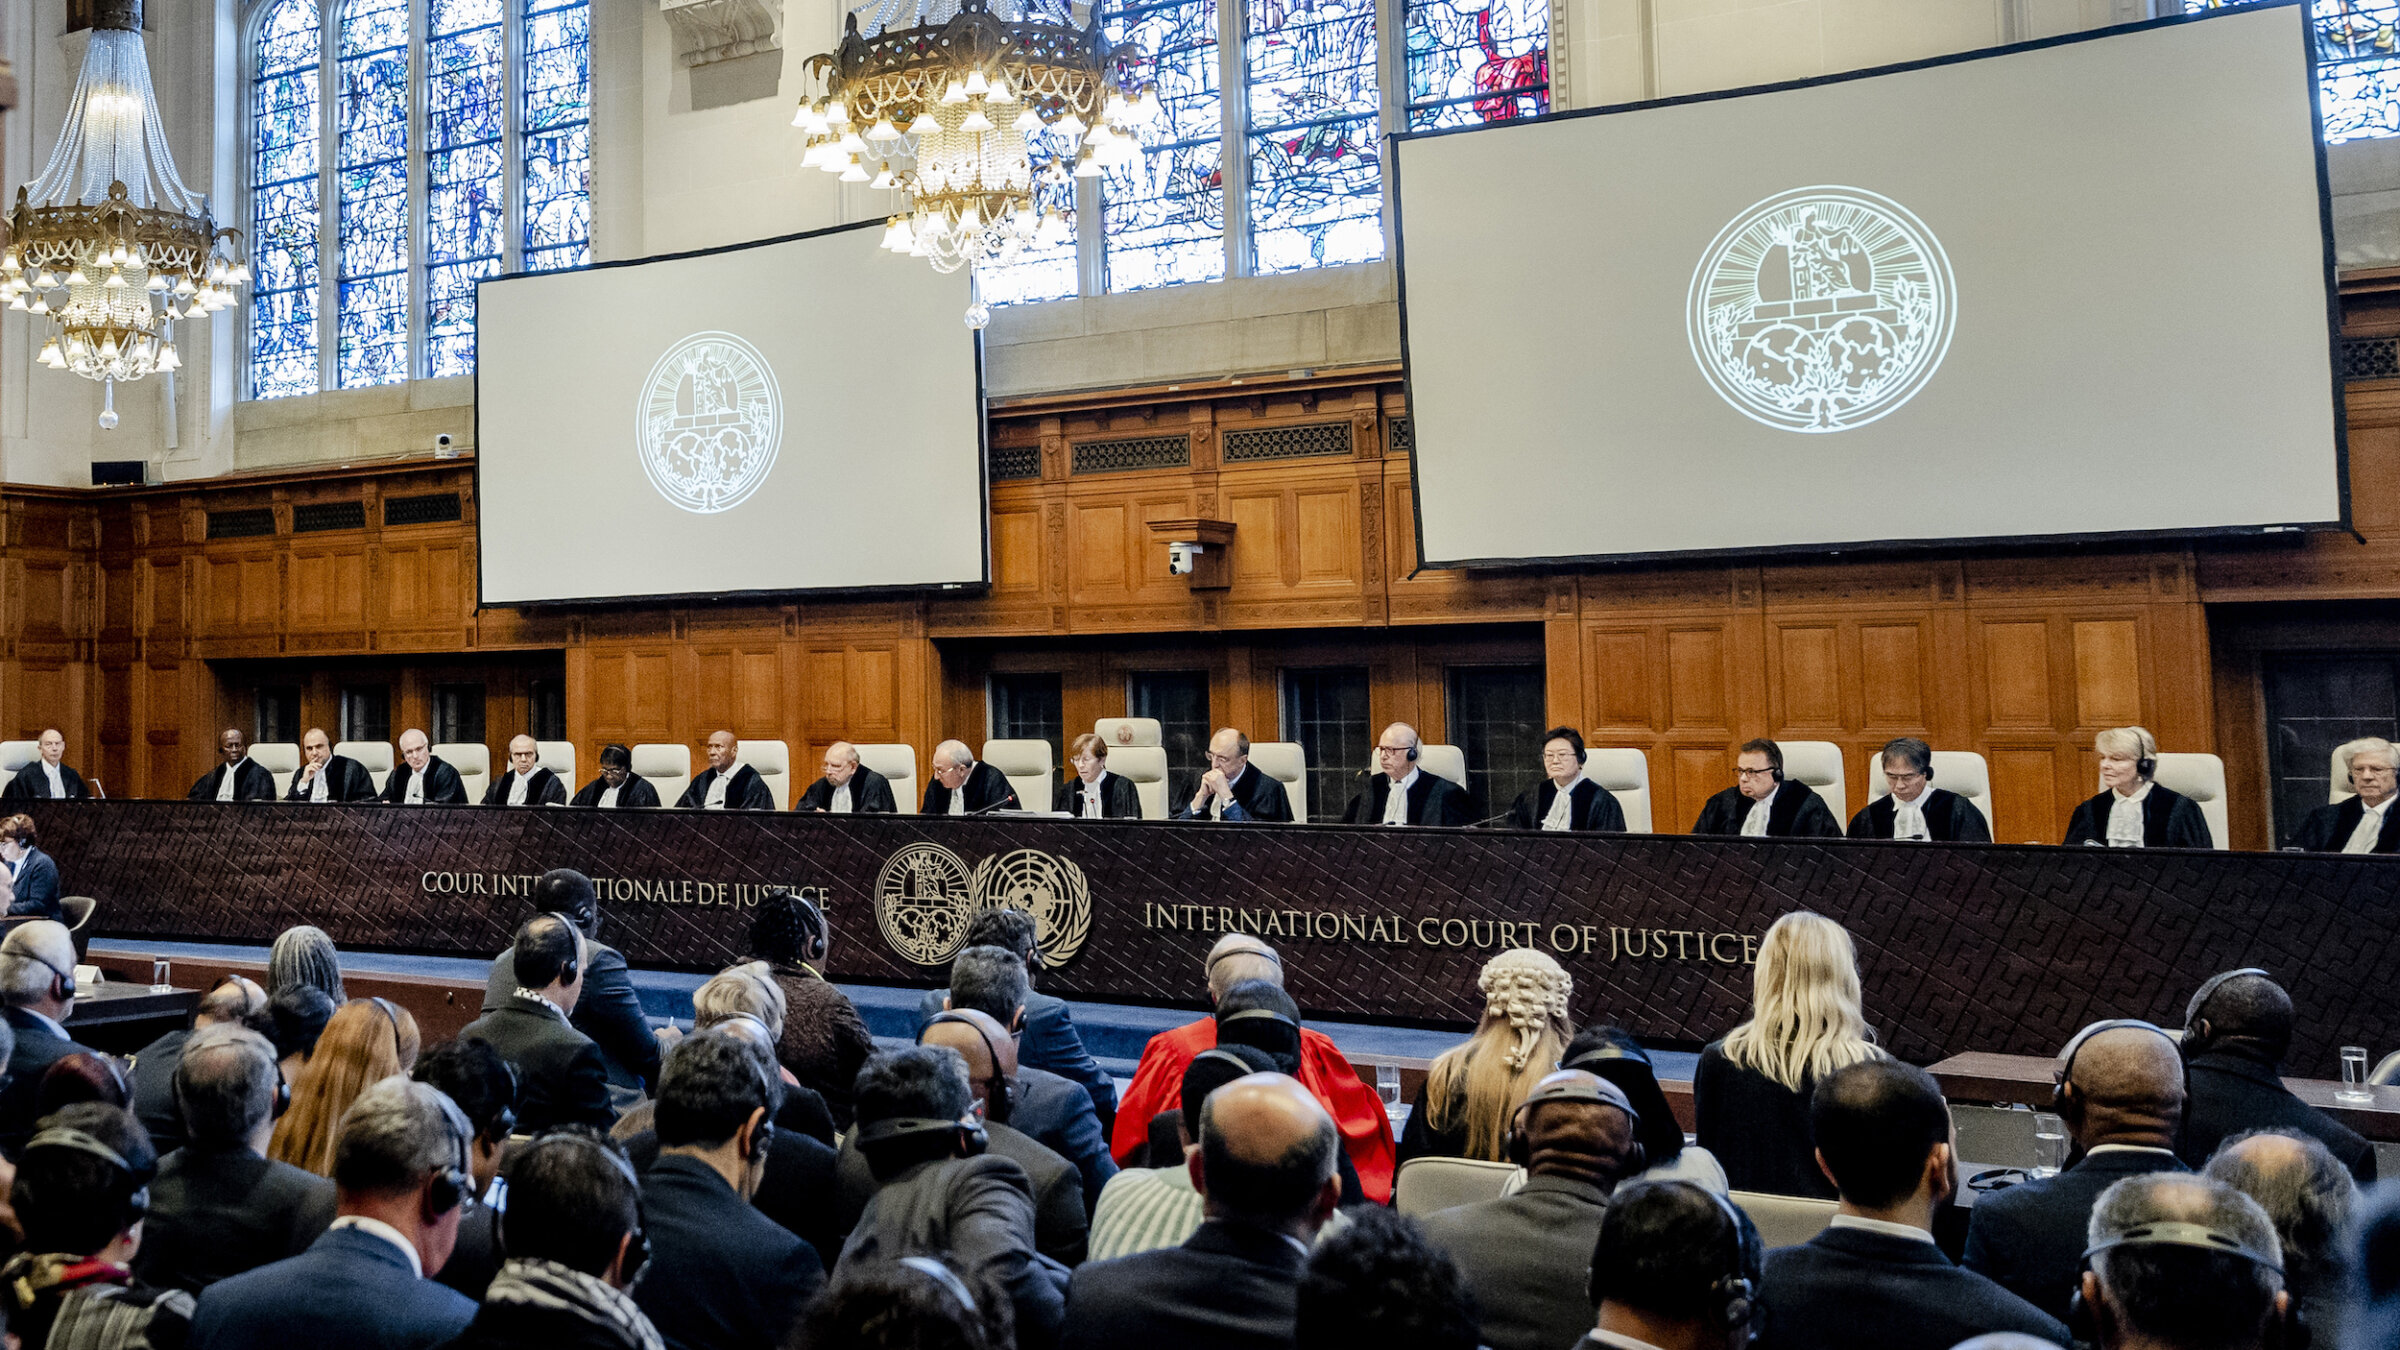 The International Court of Justice. 